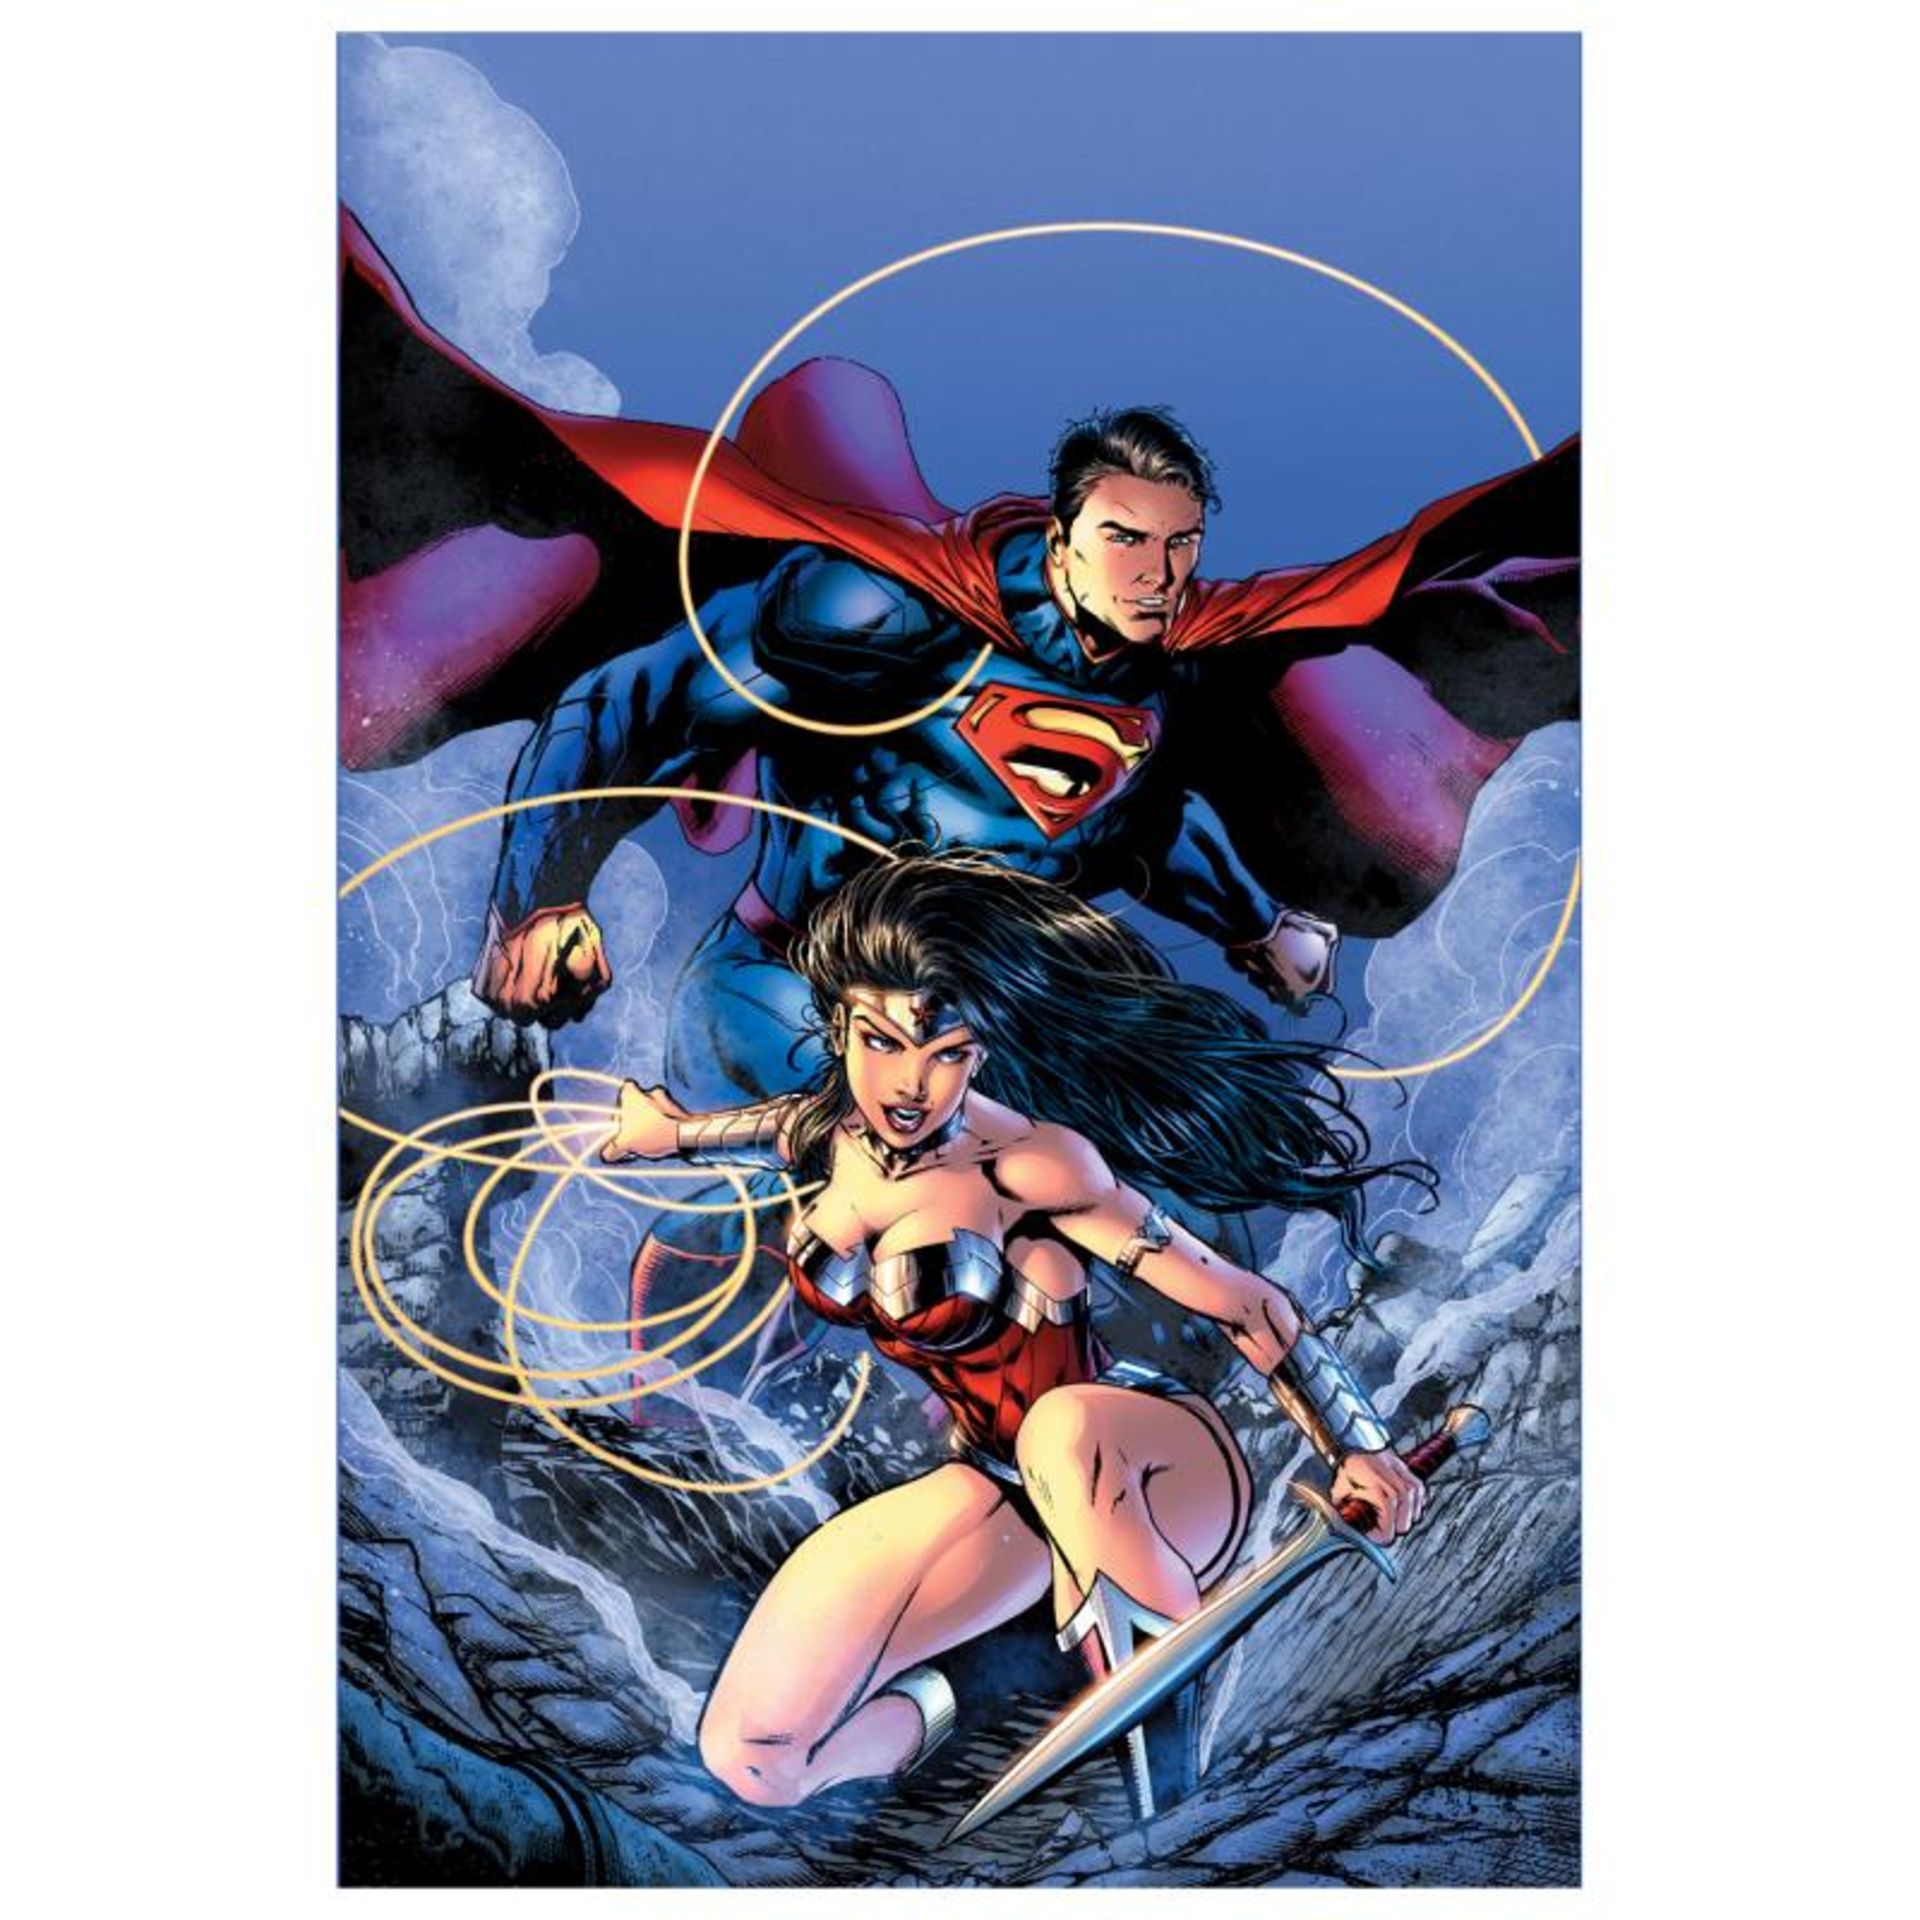 DC Comics, "Justice League (The New 52) #14" Numbered Limited Edition Giclee on